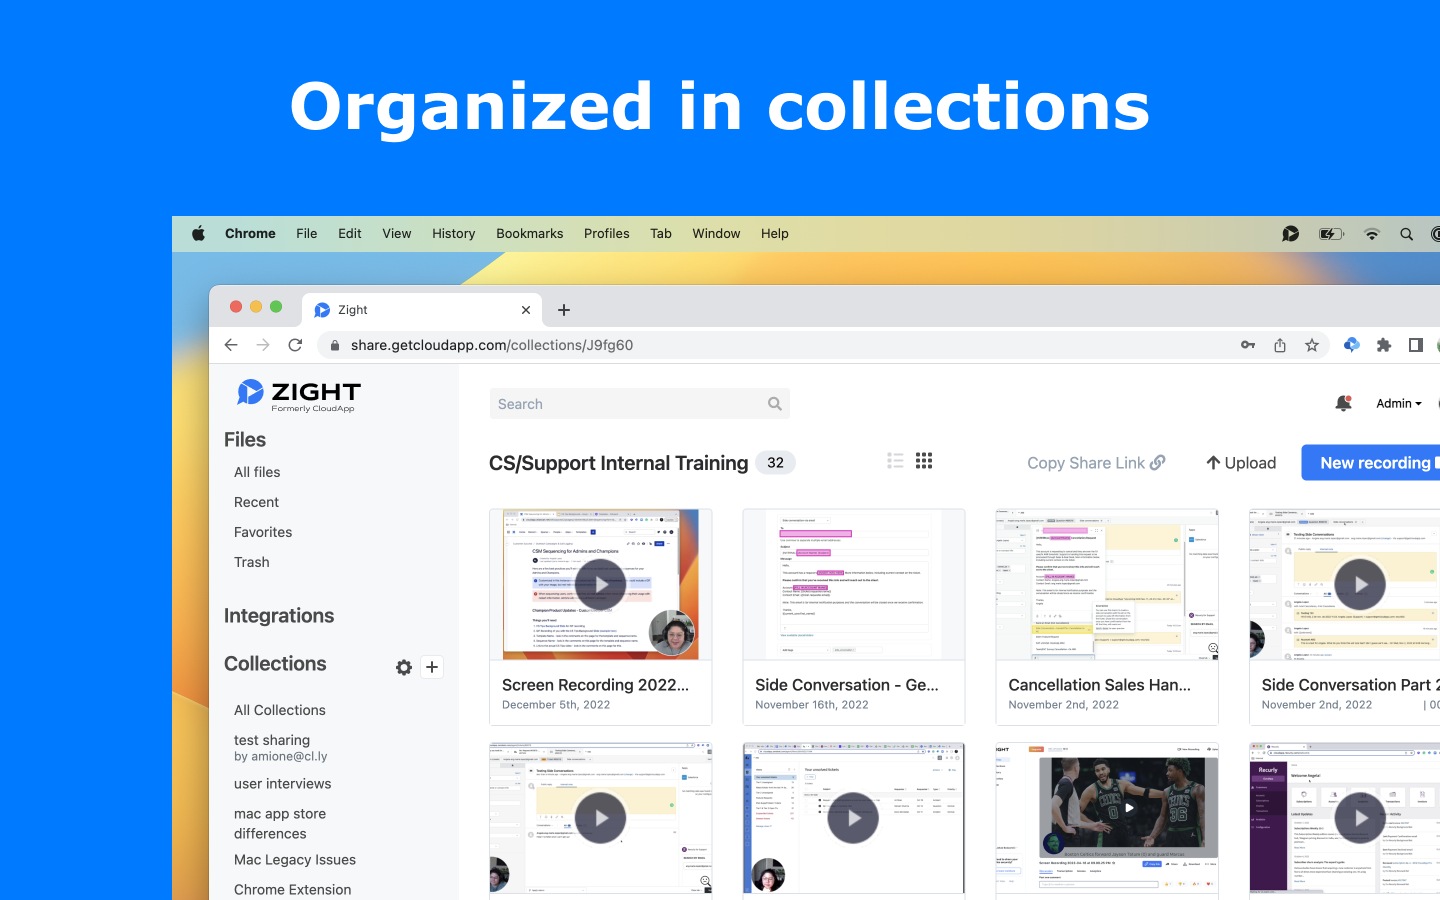 Zight (formerly CloudApp) Software - Organize in Collections